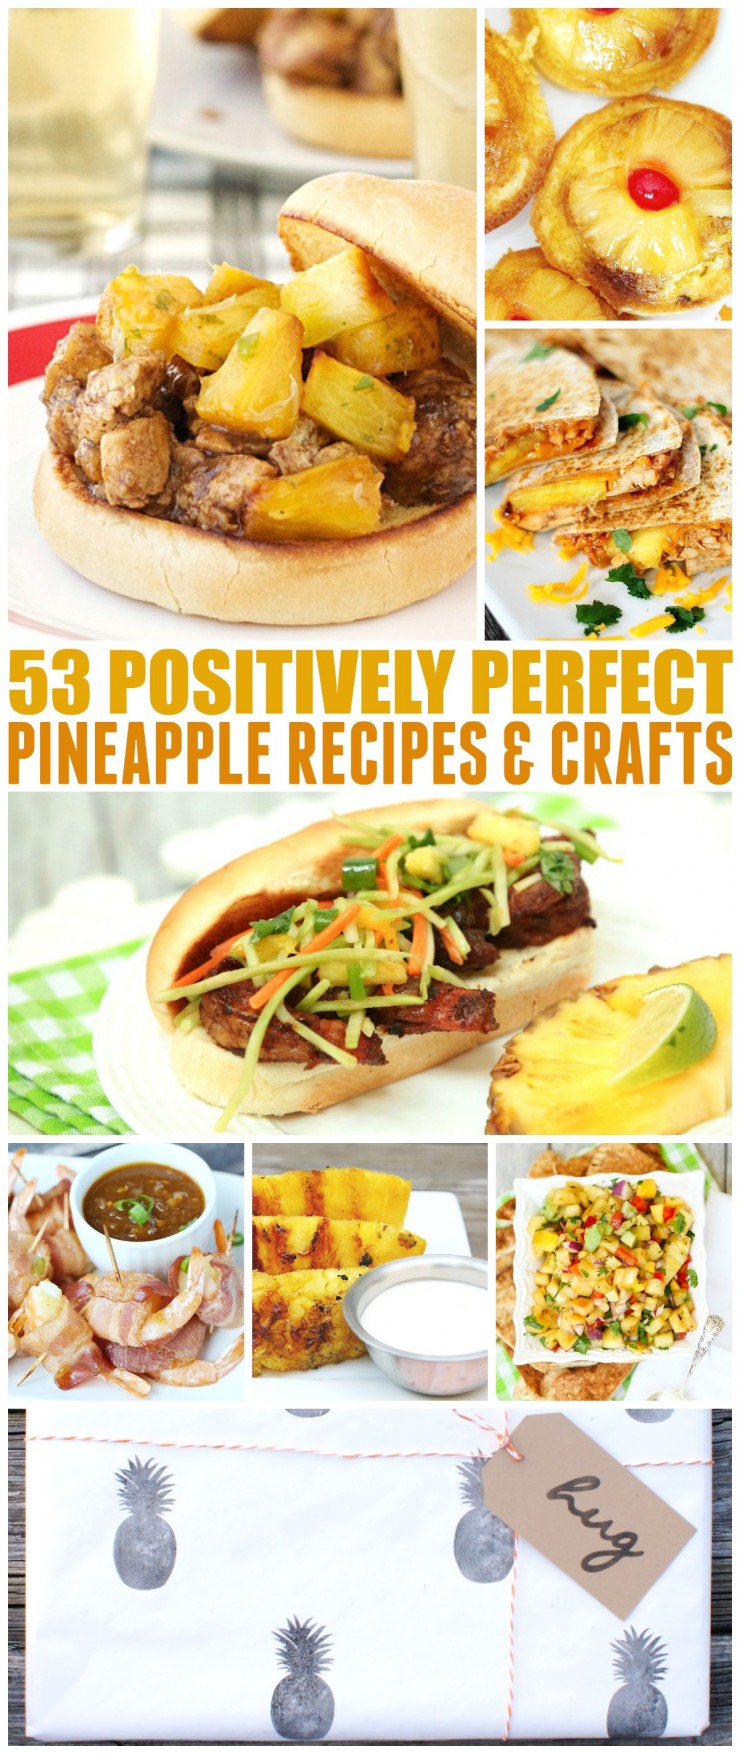 53 Positively Perfect Pineapple Recipes & Pineapple Crafts from pineapple desserts to meals made with pineapple and more! 